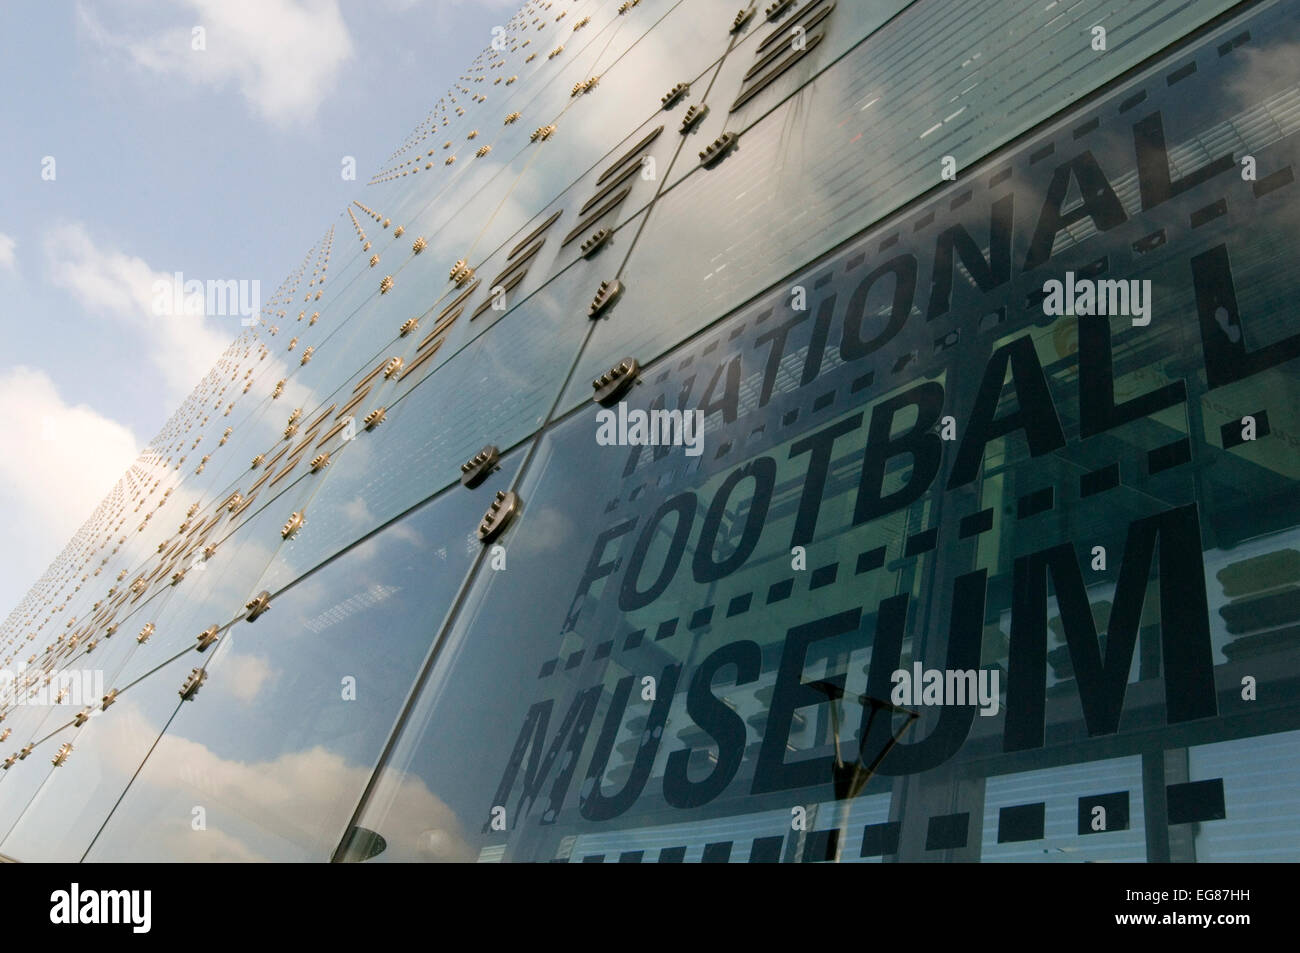 national Football Museum Manchester nfm Stockfoto